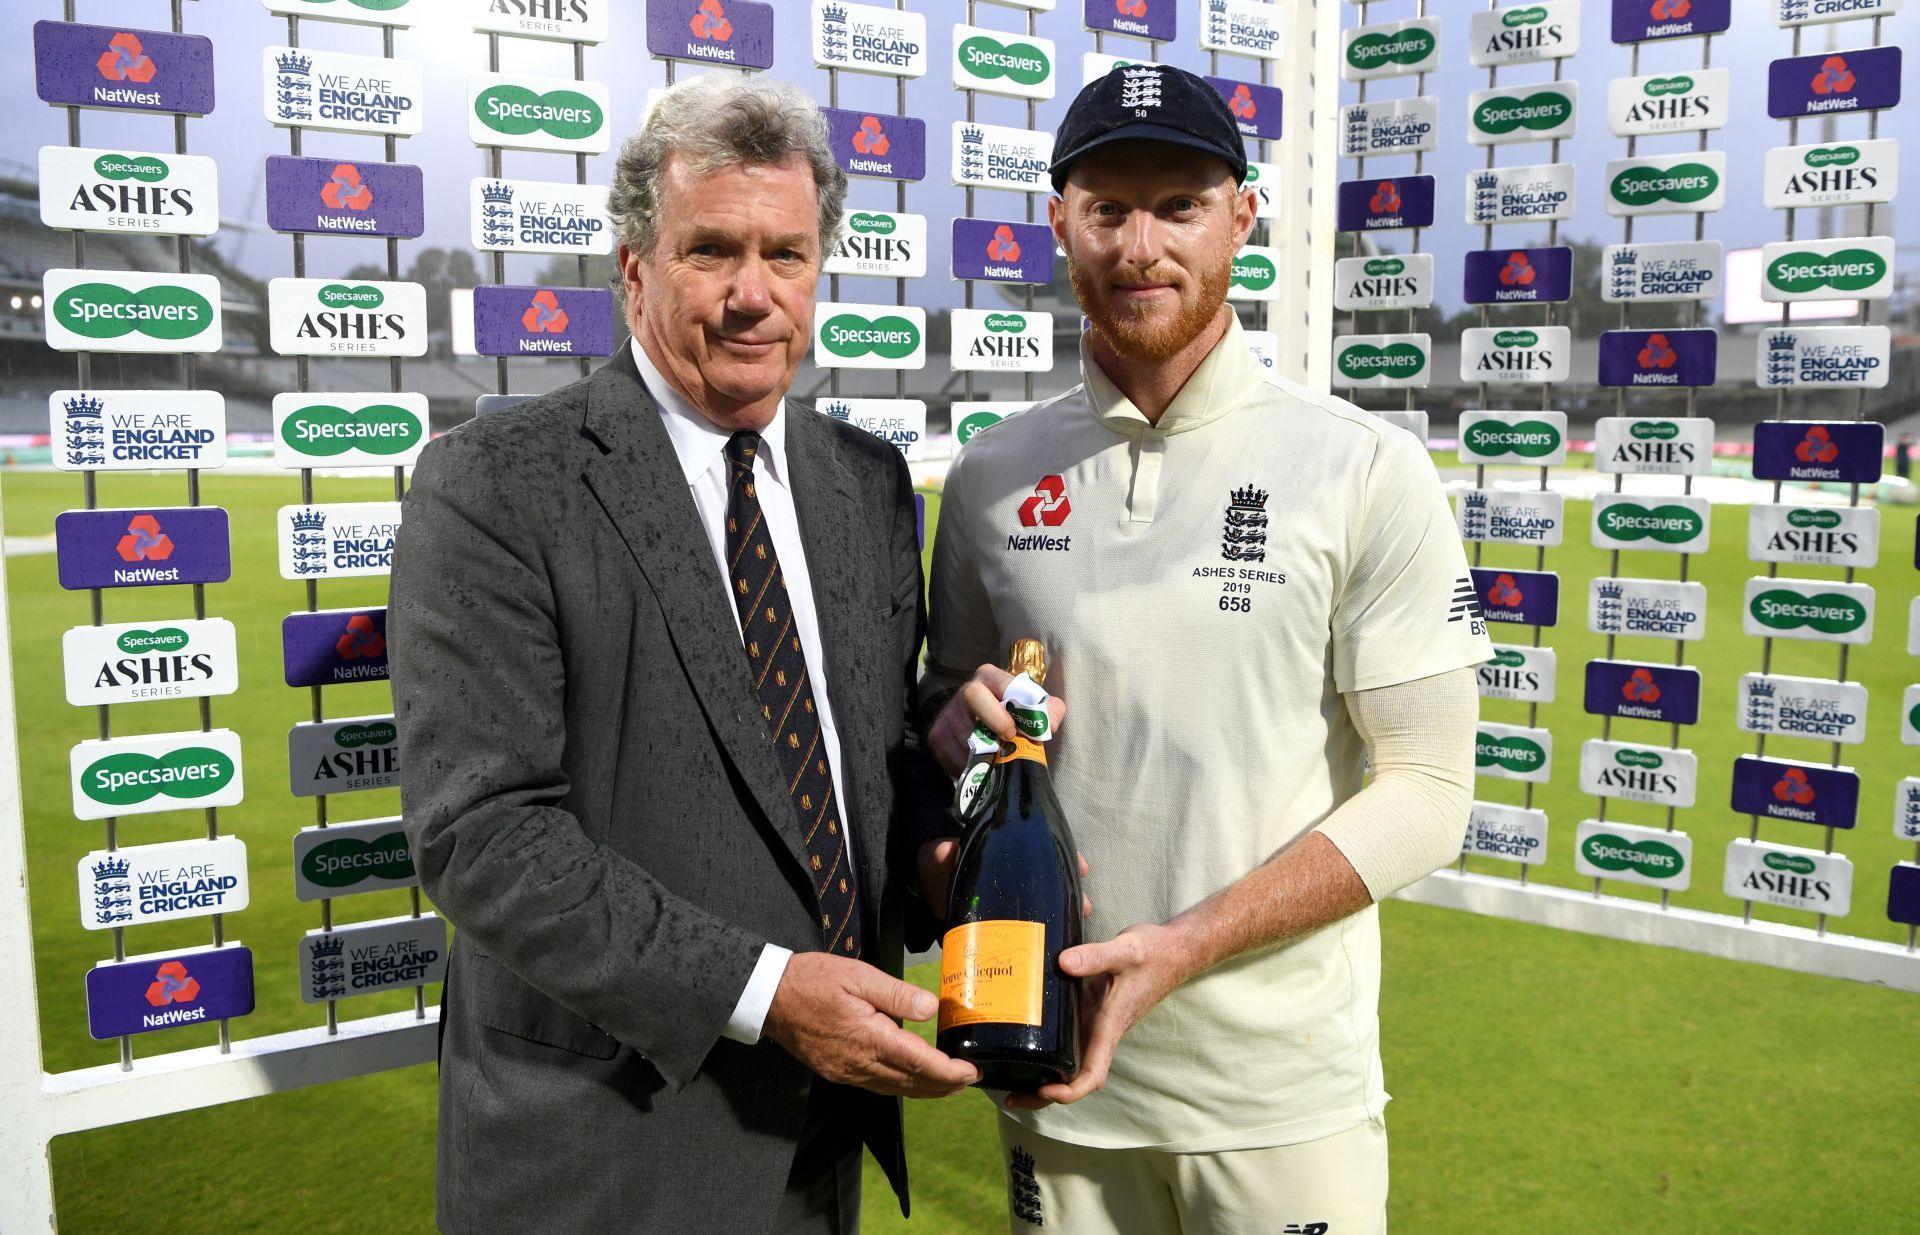 Ben Stokes smashed a century on the final day